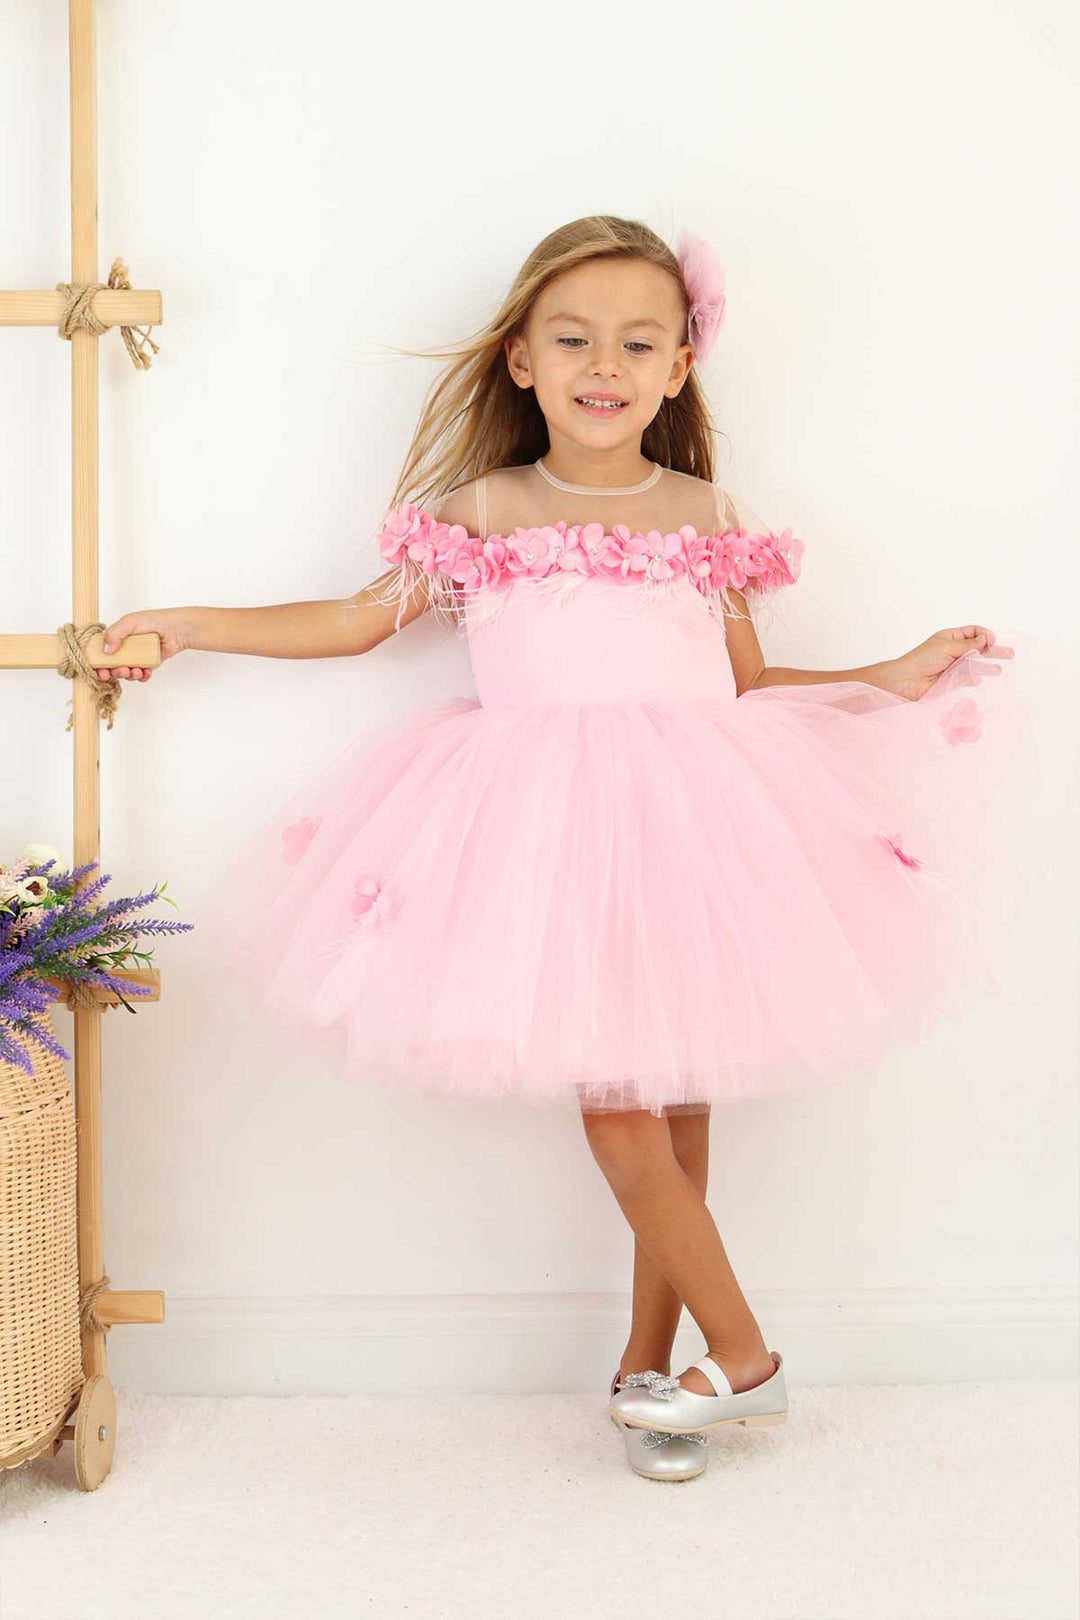 A pink sleeveless fairy dress that has 3D flowers with rhinestones, cap sleeve, feathers, illusion collar, satin top, and knee length skirt